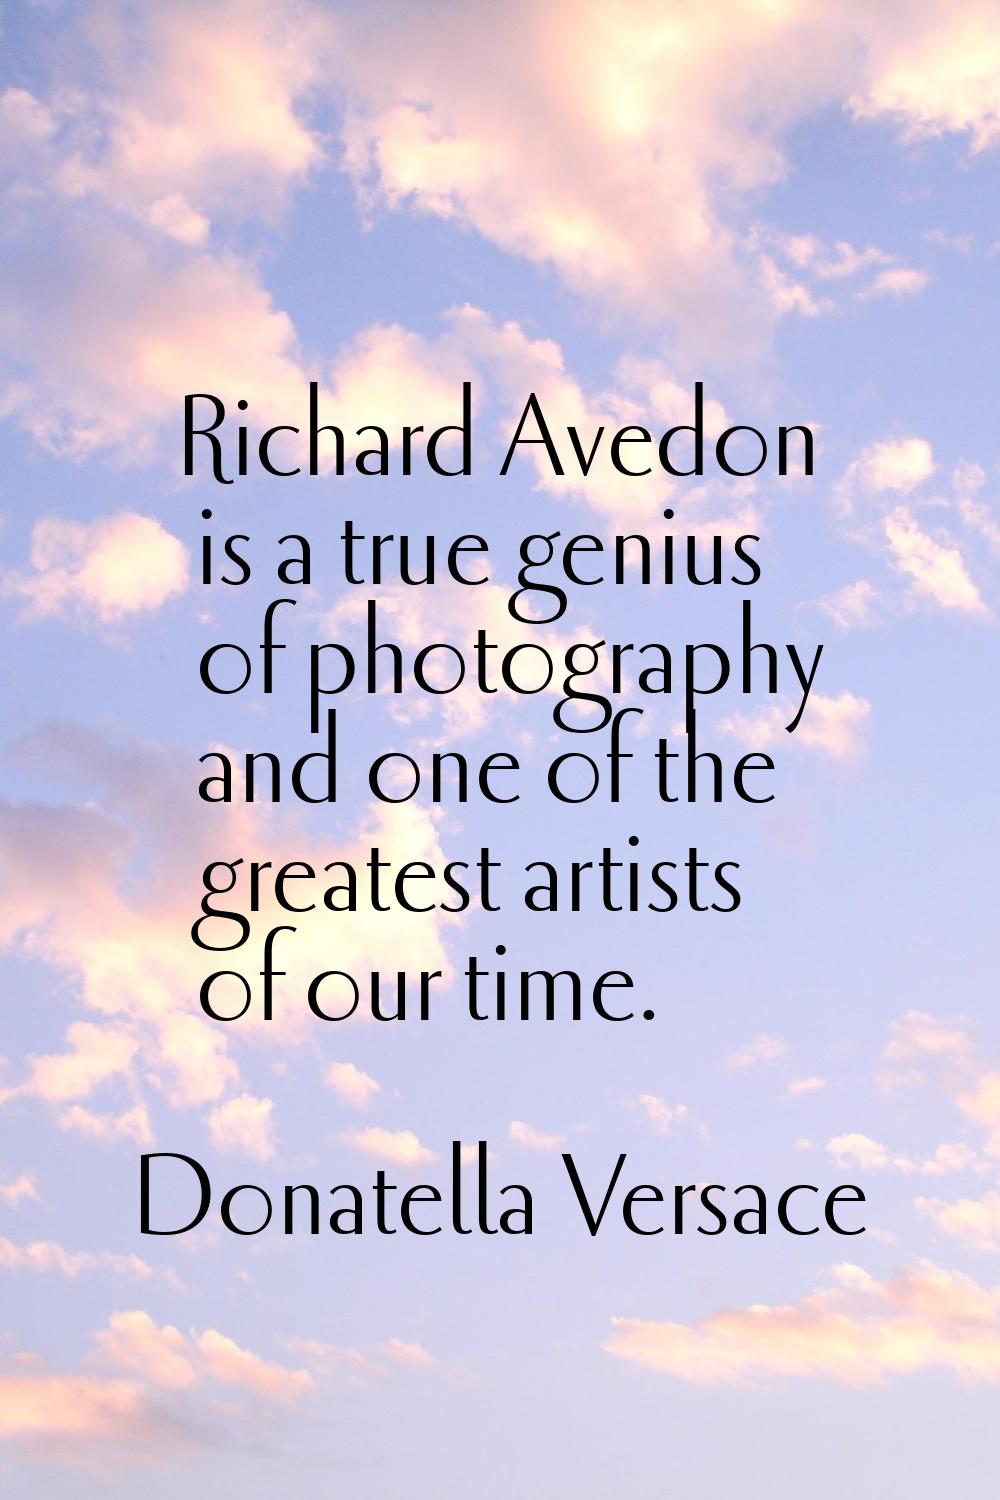 Richard Avedon is a true genius of photography and one of the greatest artists of our time.